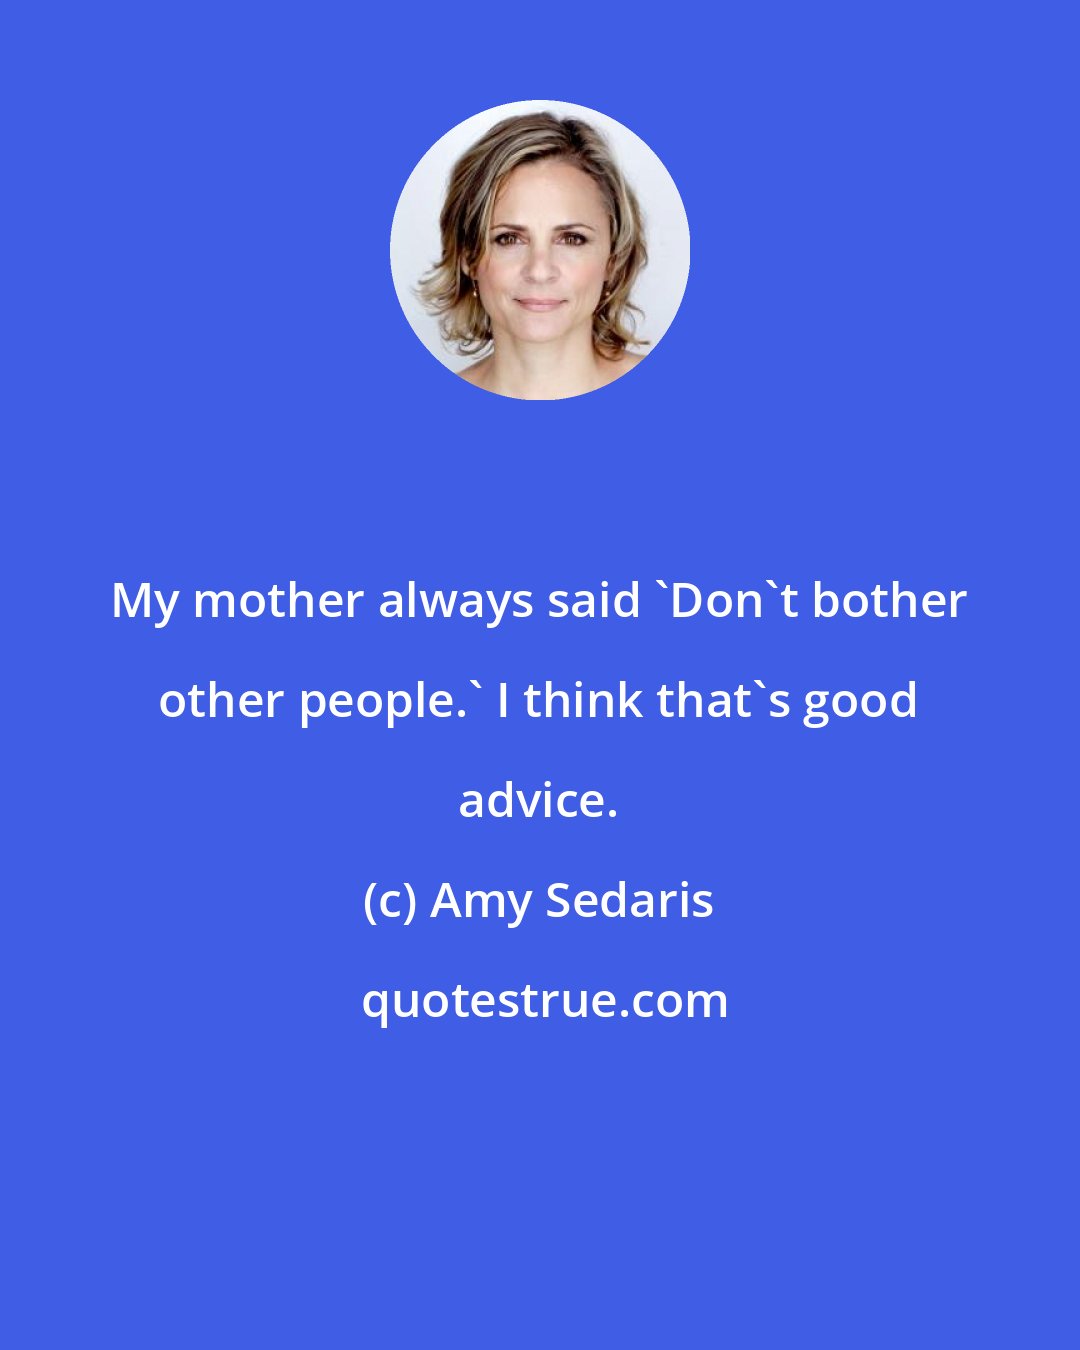 Amy Sedaris: My mother always said 'Don't bother other people.' I think that's good advice.